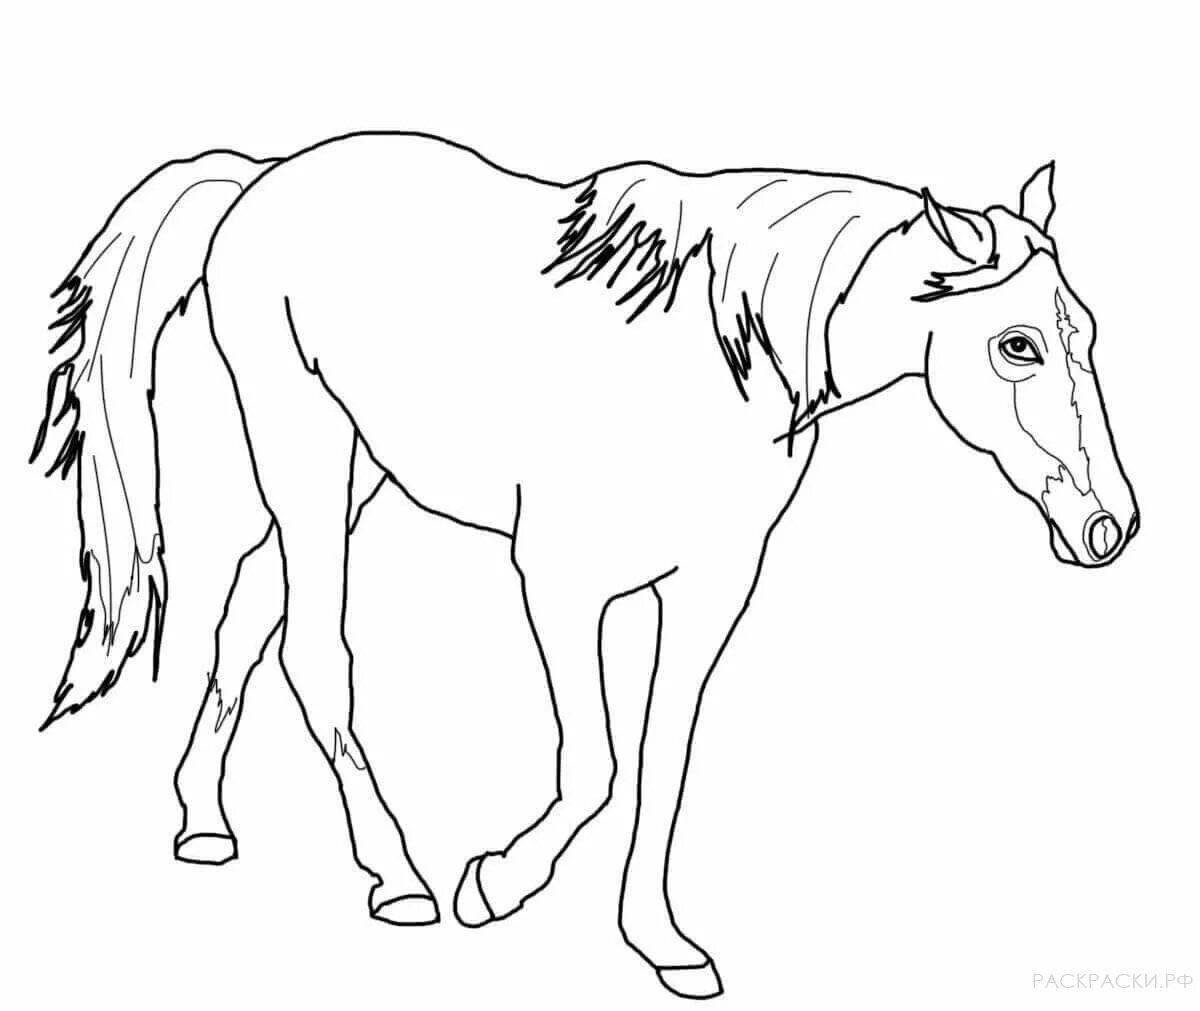 Coloring page dazzling lanky horse